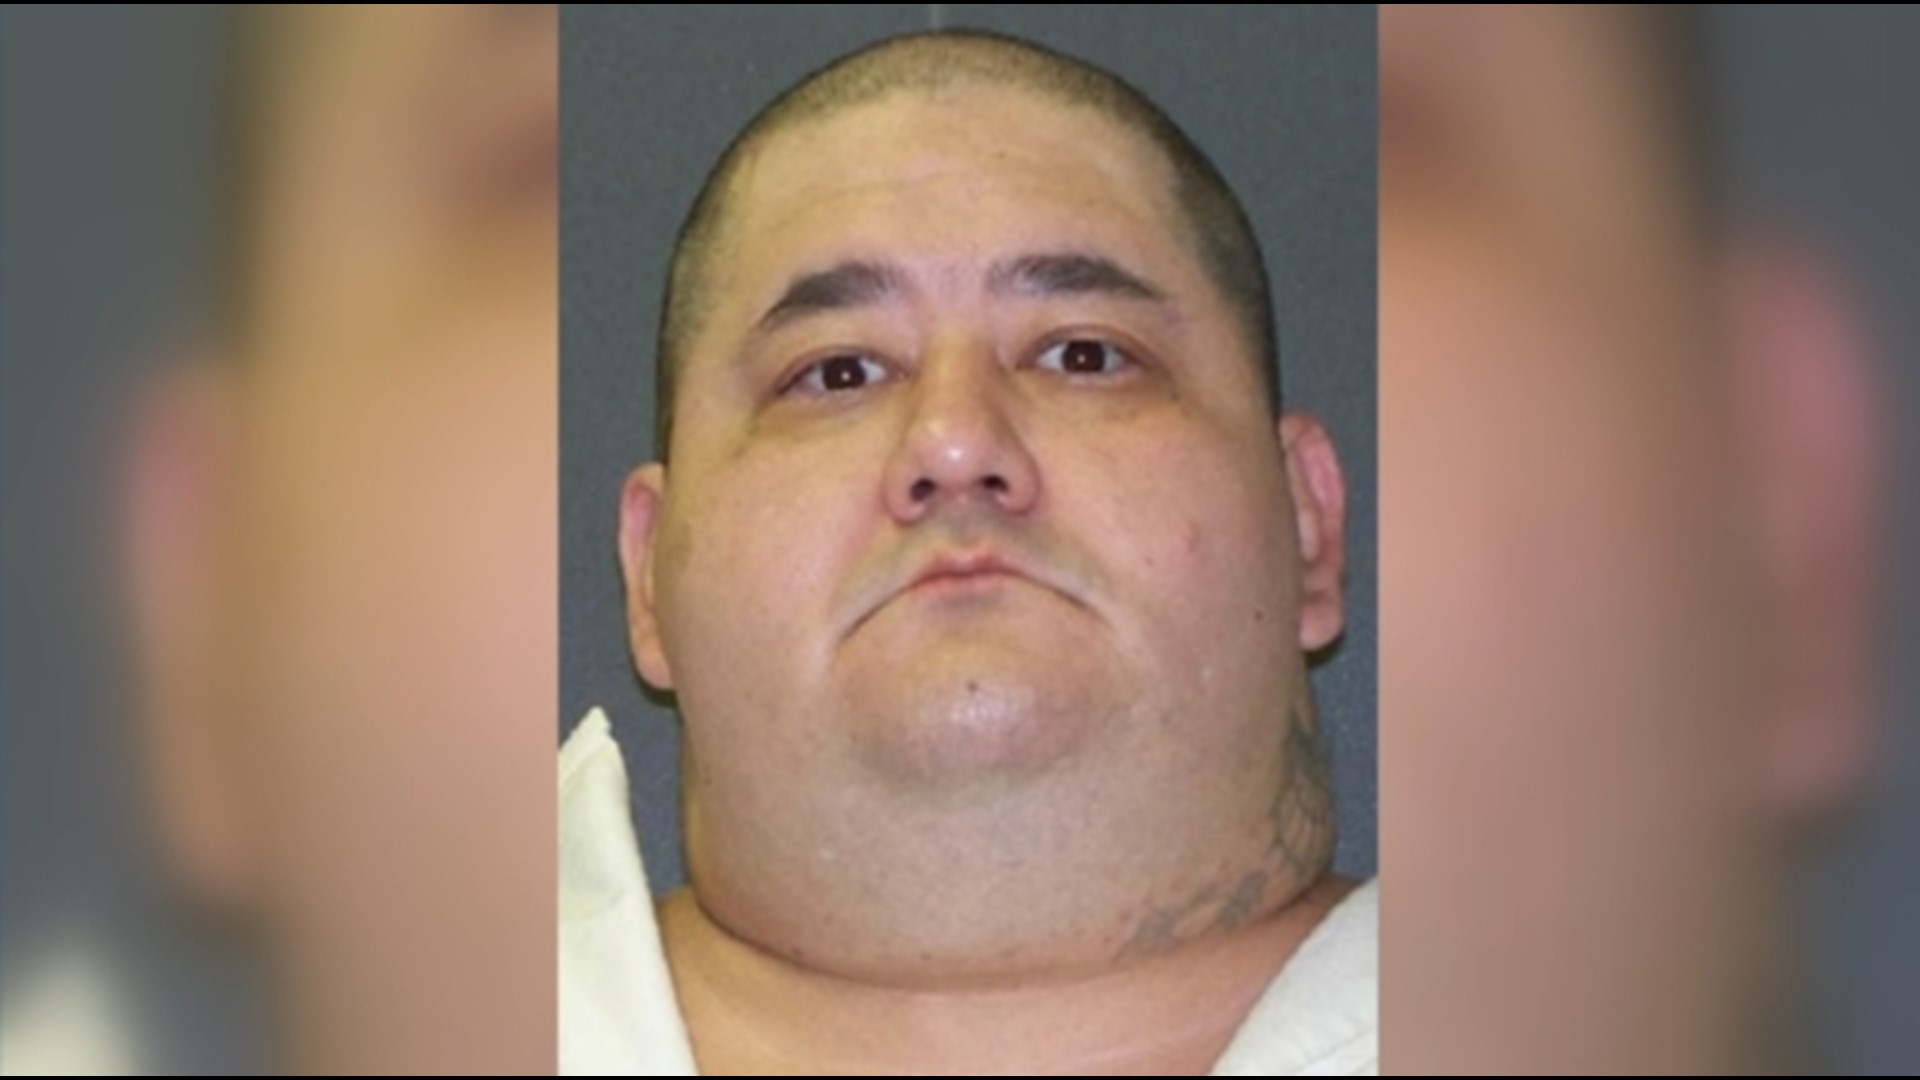 Gonzales was initially supposed to return to Ector County on Tuesday.